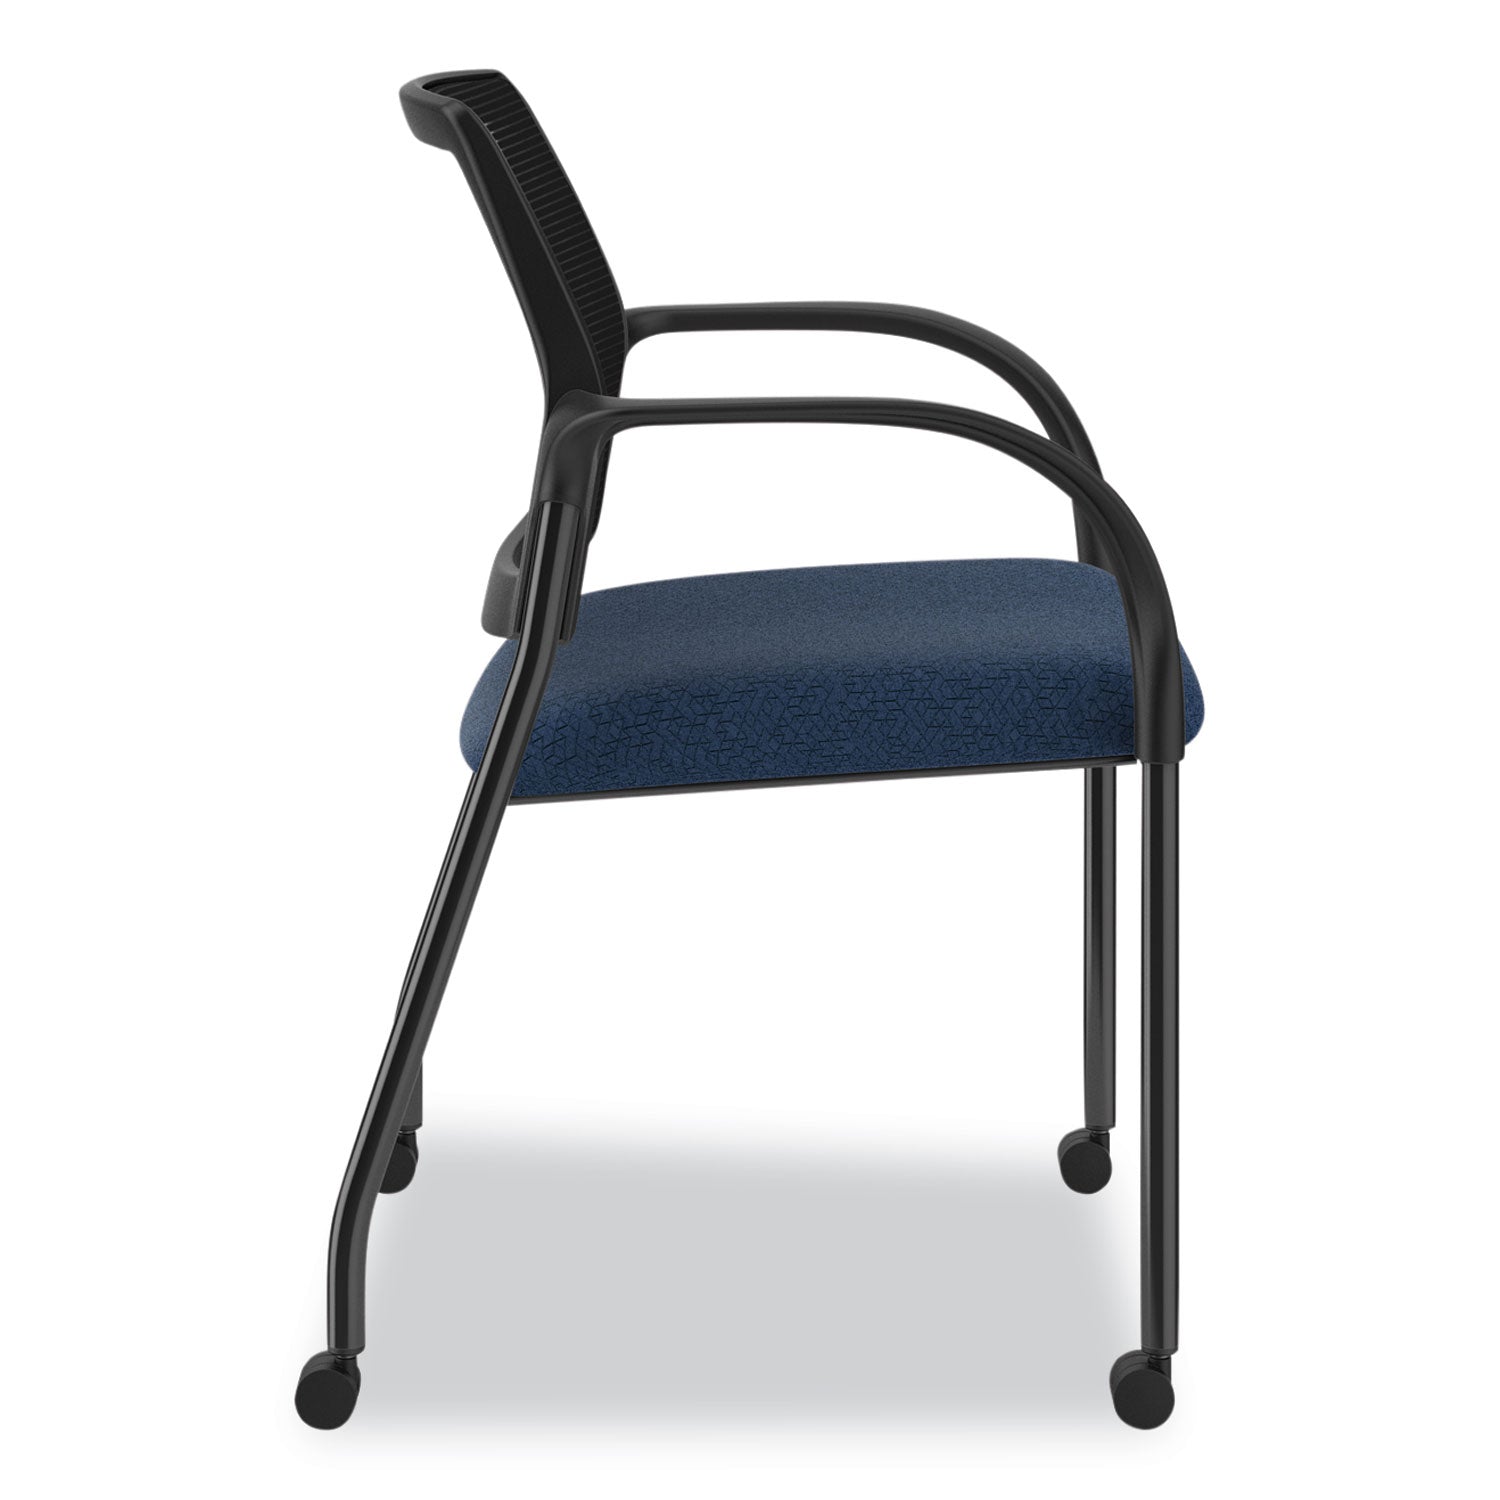 ignition-series-guest-chair-with-arms-25-x-2175-x-335-navy-seat-black-back-black-base-ships-in-7-10-business-days_honis107imapx13 - 2